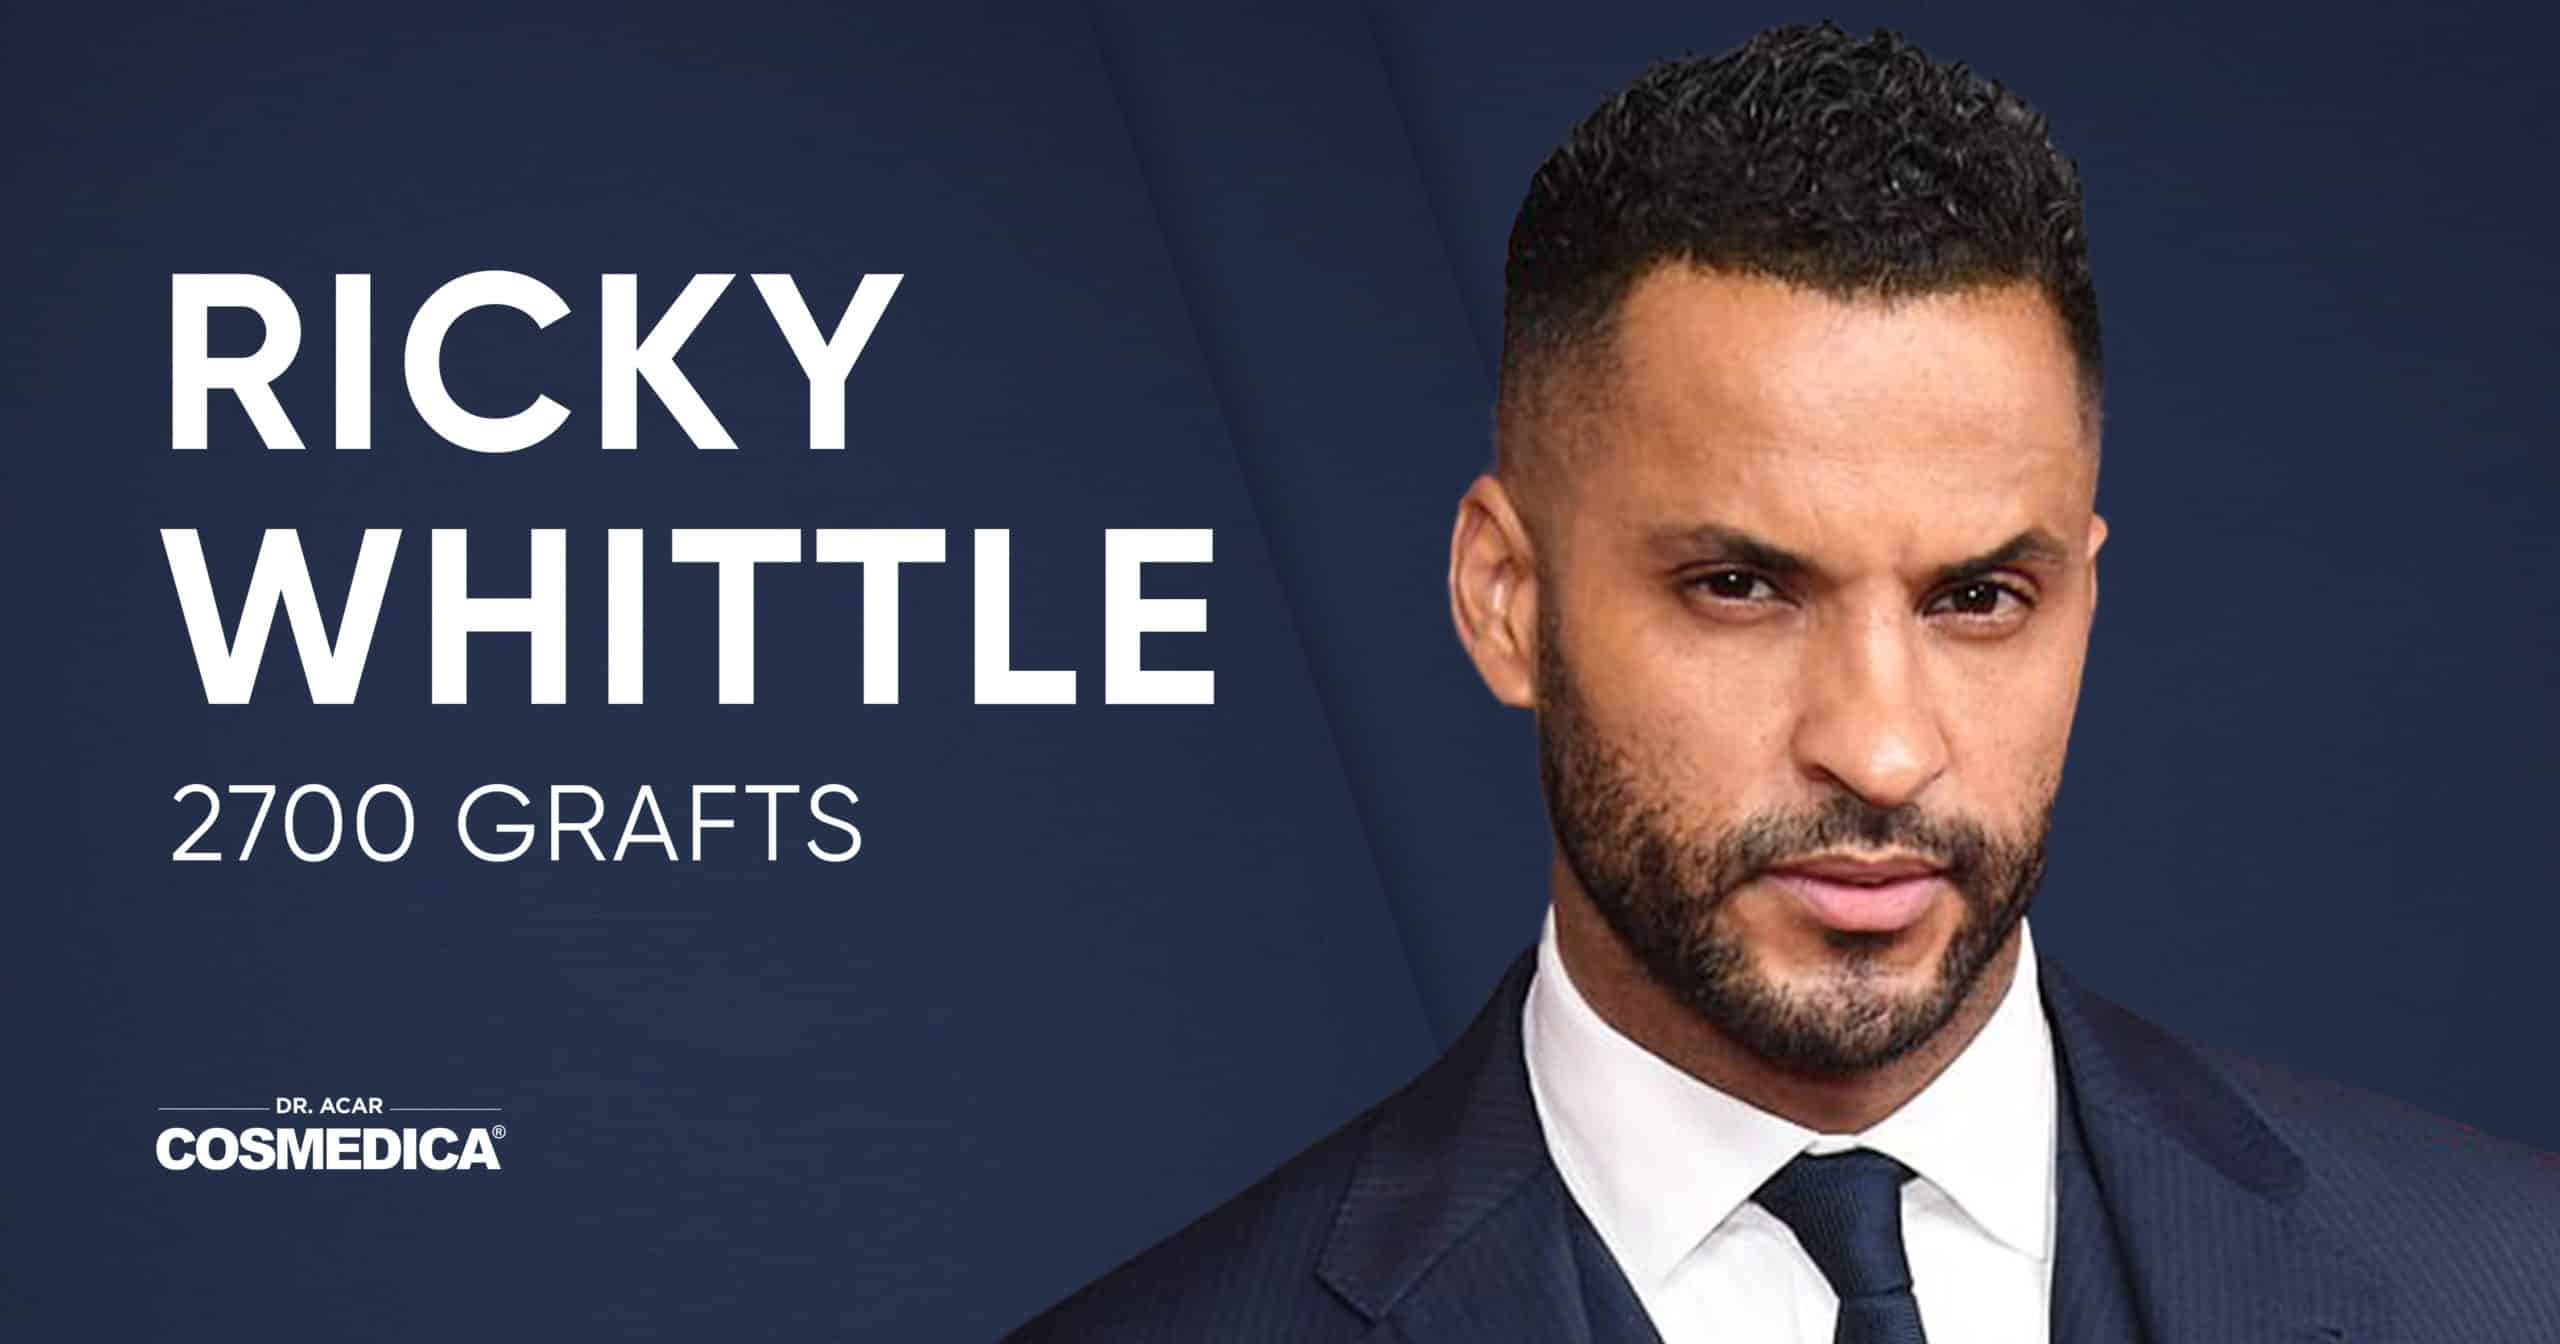 Hair Transplant of British Actor Ricky Whittle